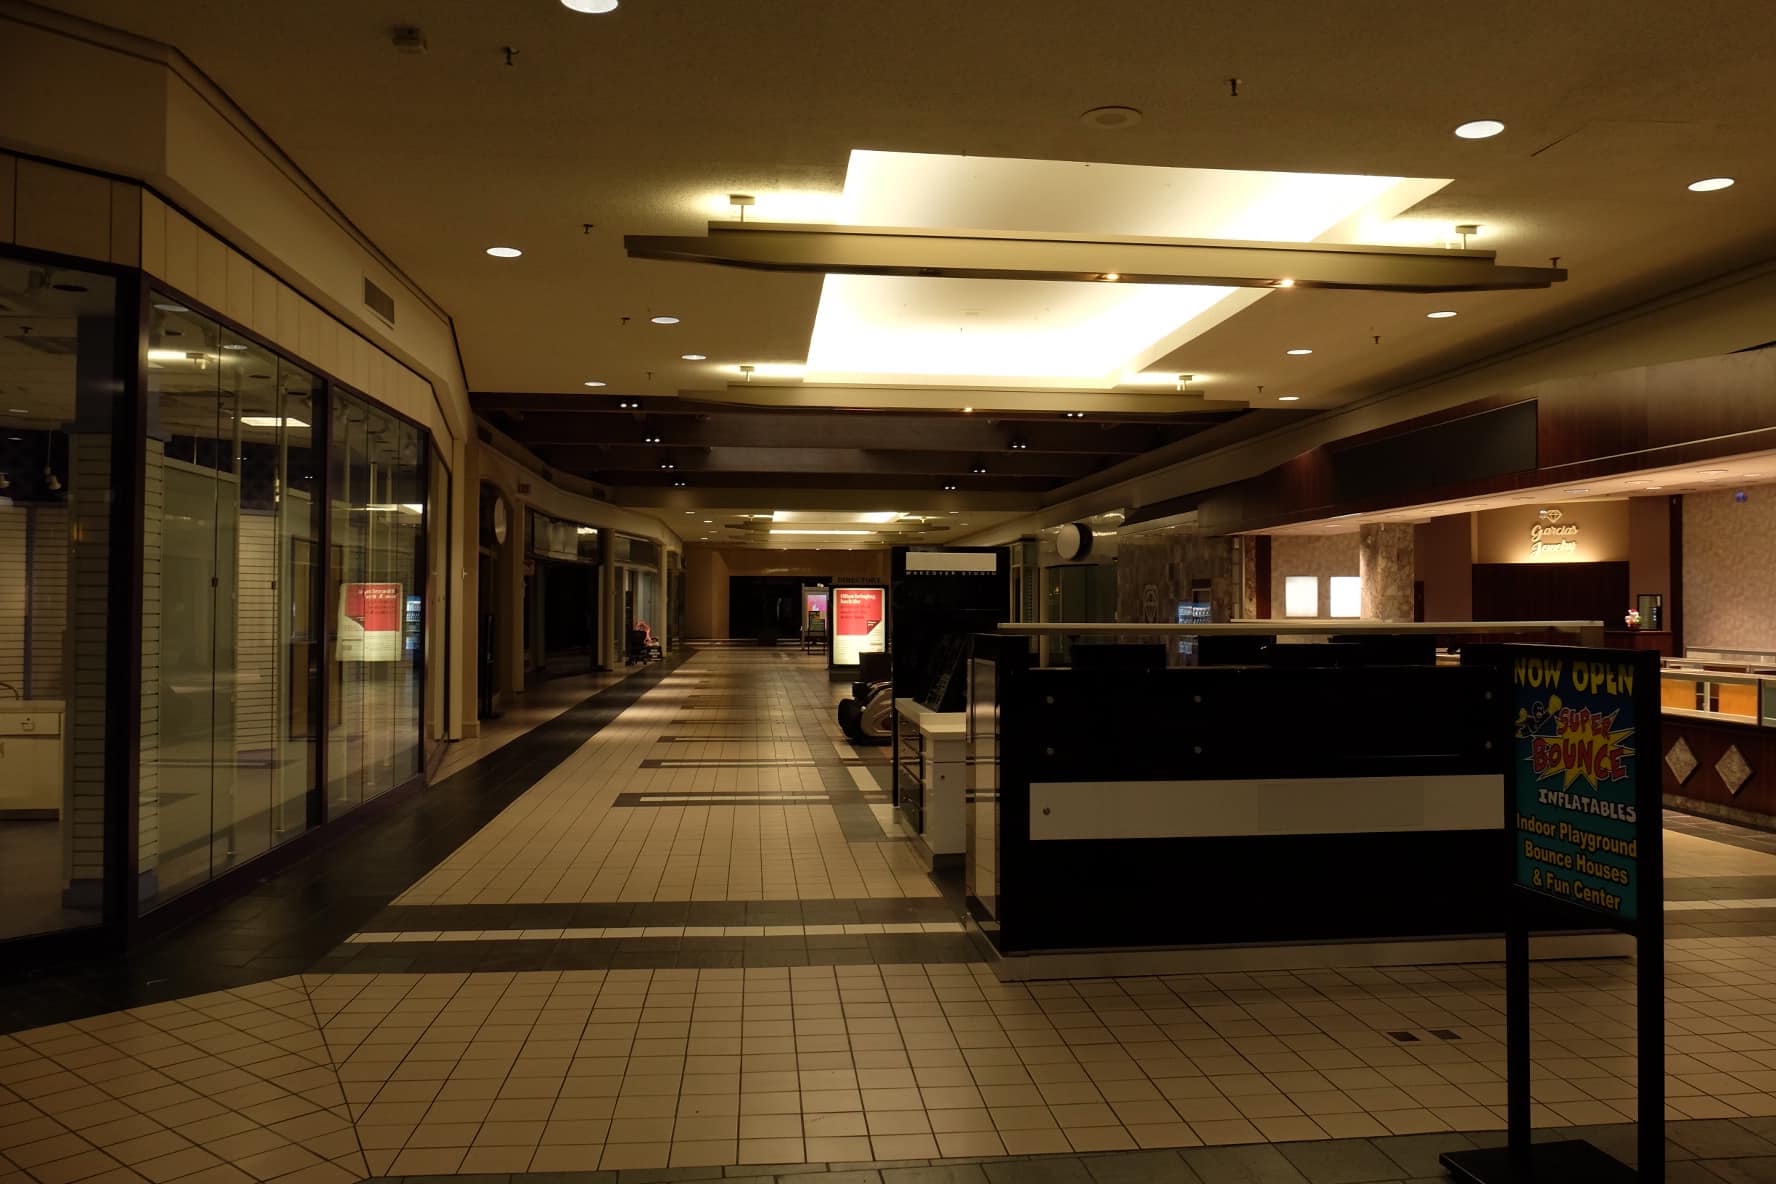 Spring Hill Mall will officially close its doors on March 22